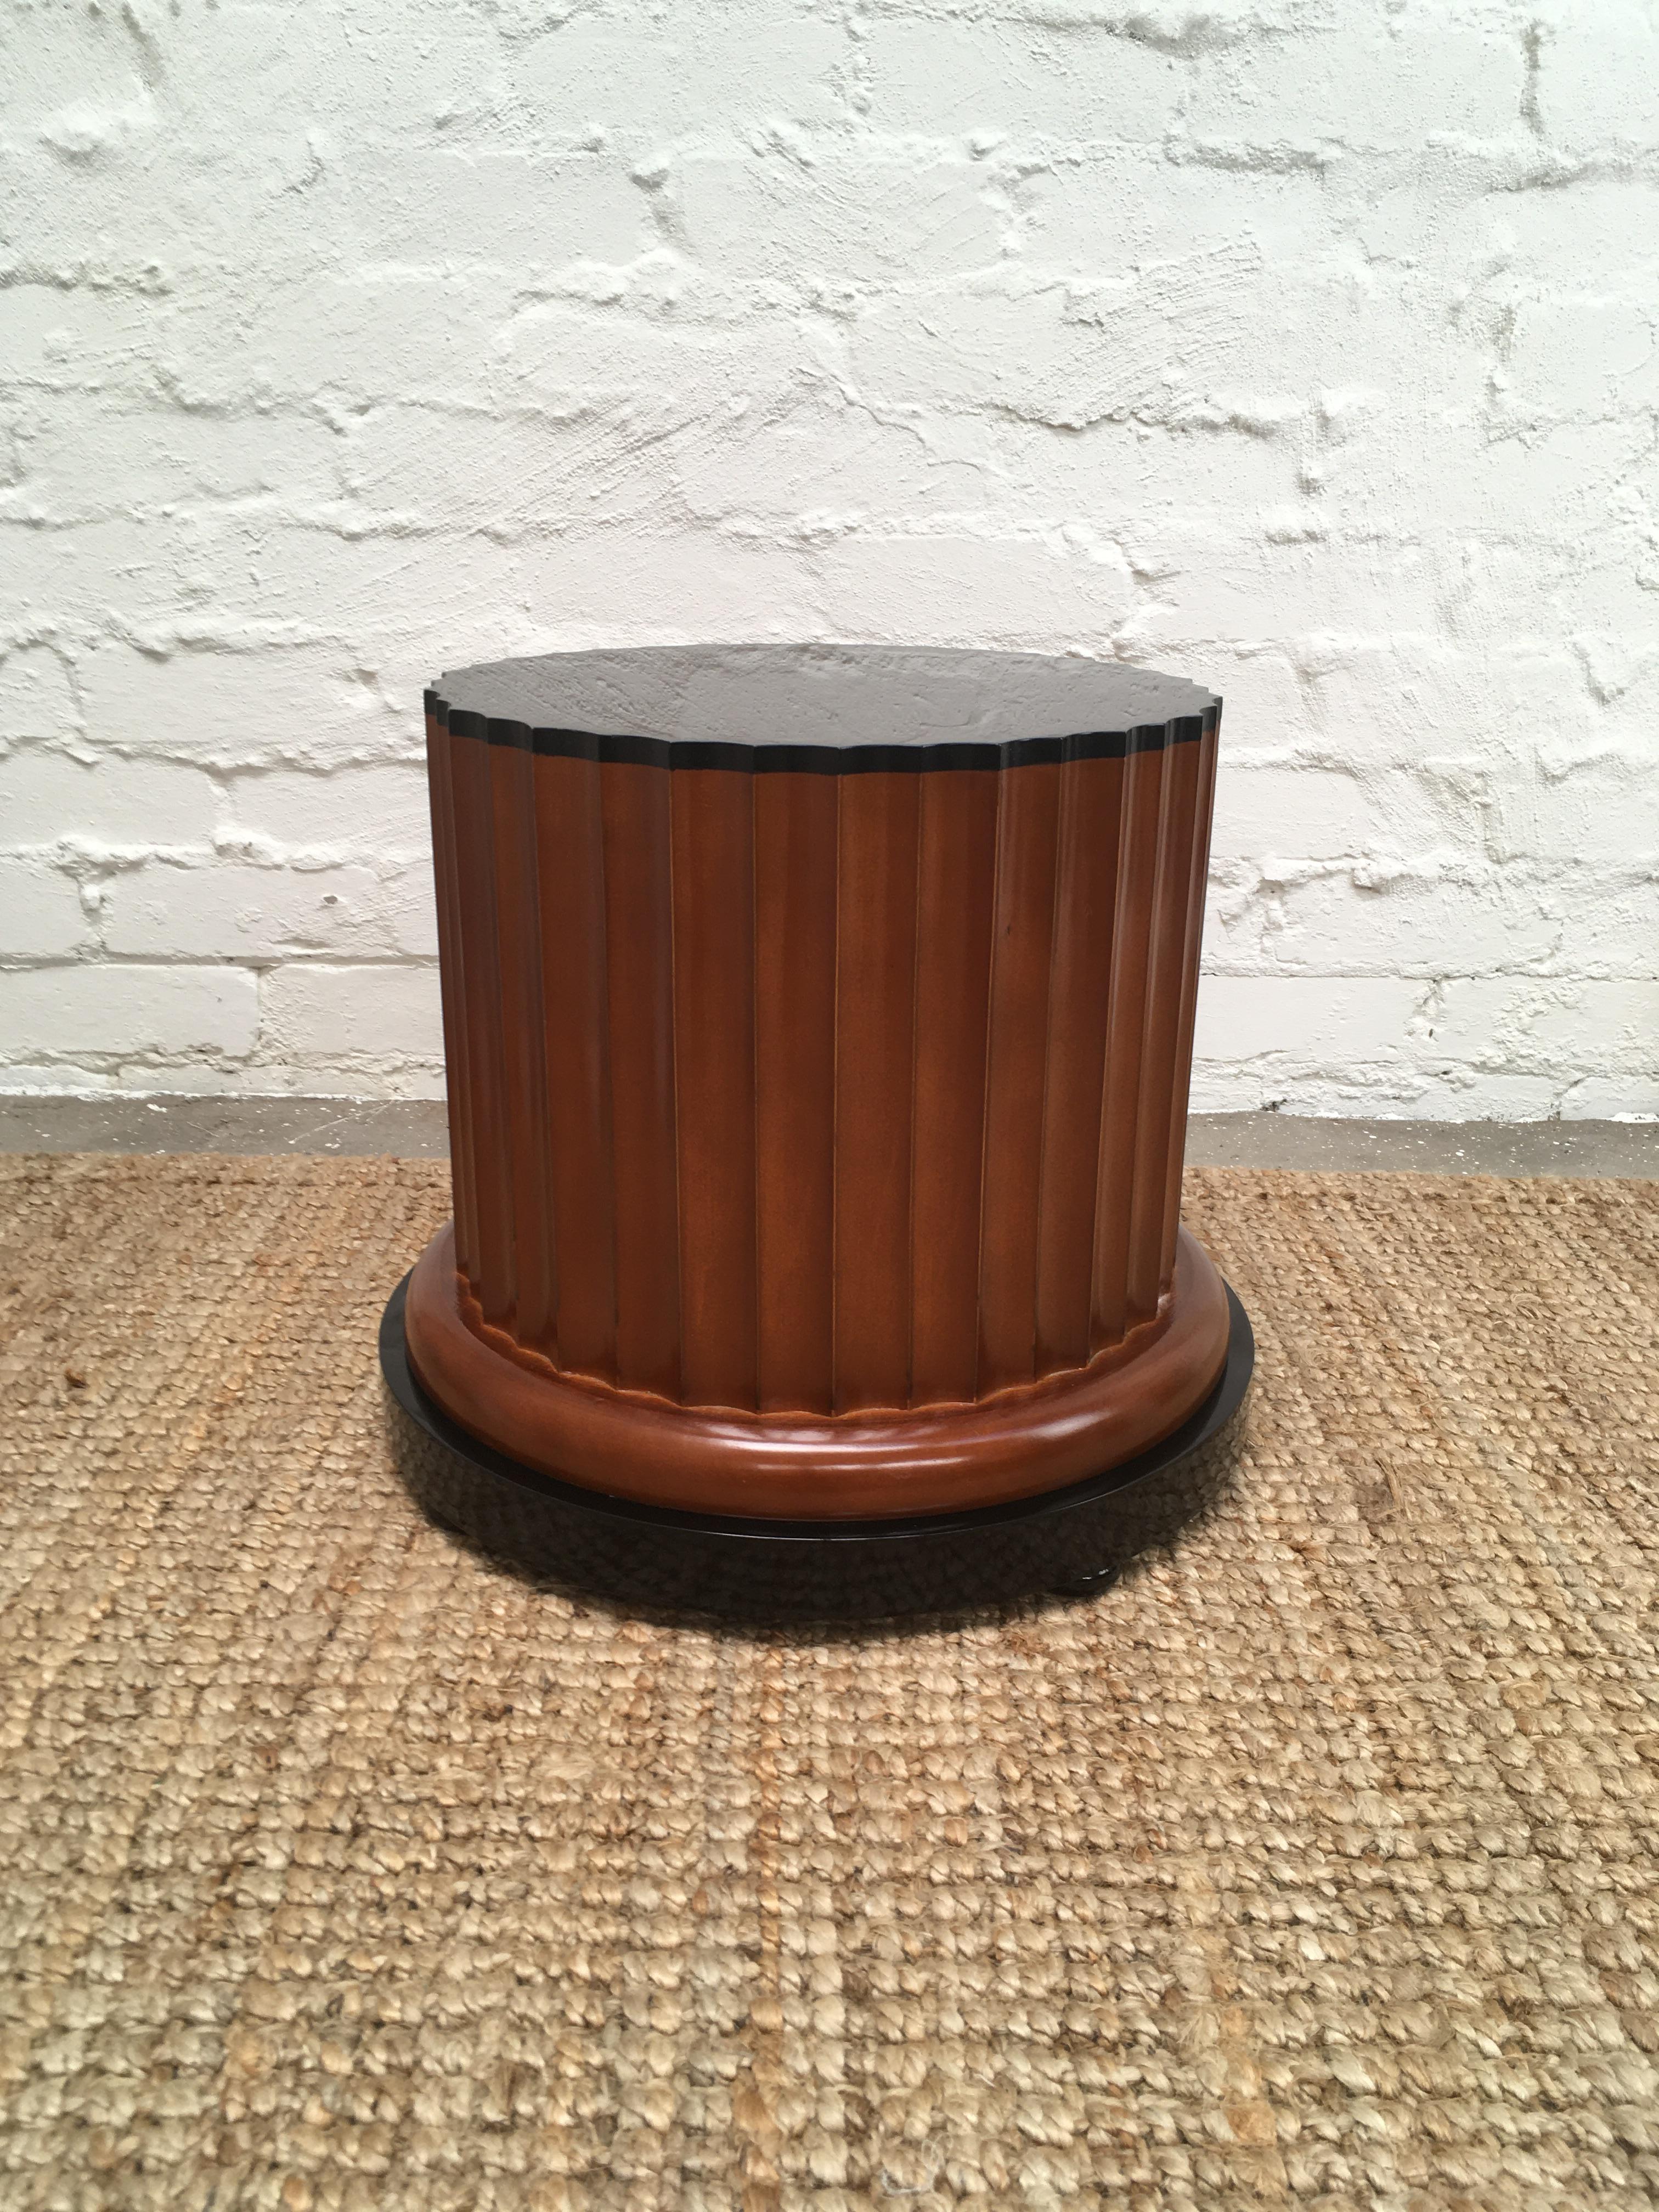 A midcentury pedestal in the form of a short, fluted Doric column. Consisting of softwood timber with a walnut finish, a black lacquered top and base, sitting on bun feet. Likely dates from the 1970s, Italian. 

An excellent plant stand, shop